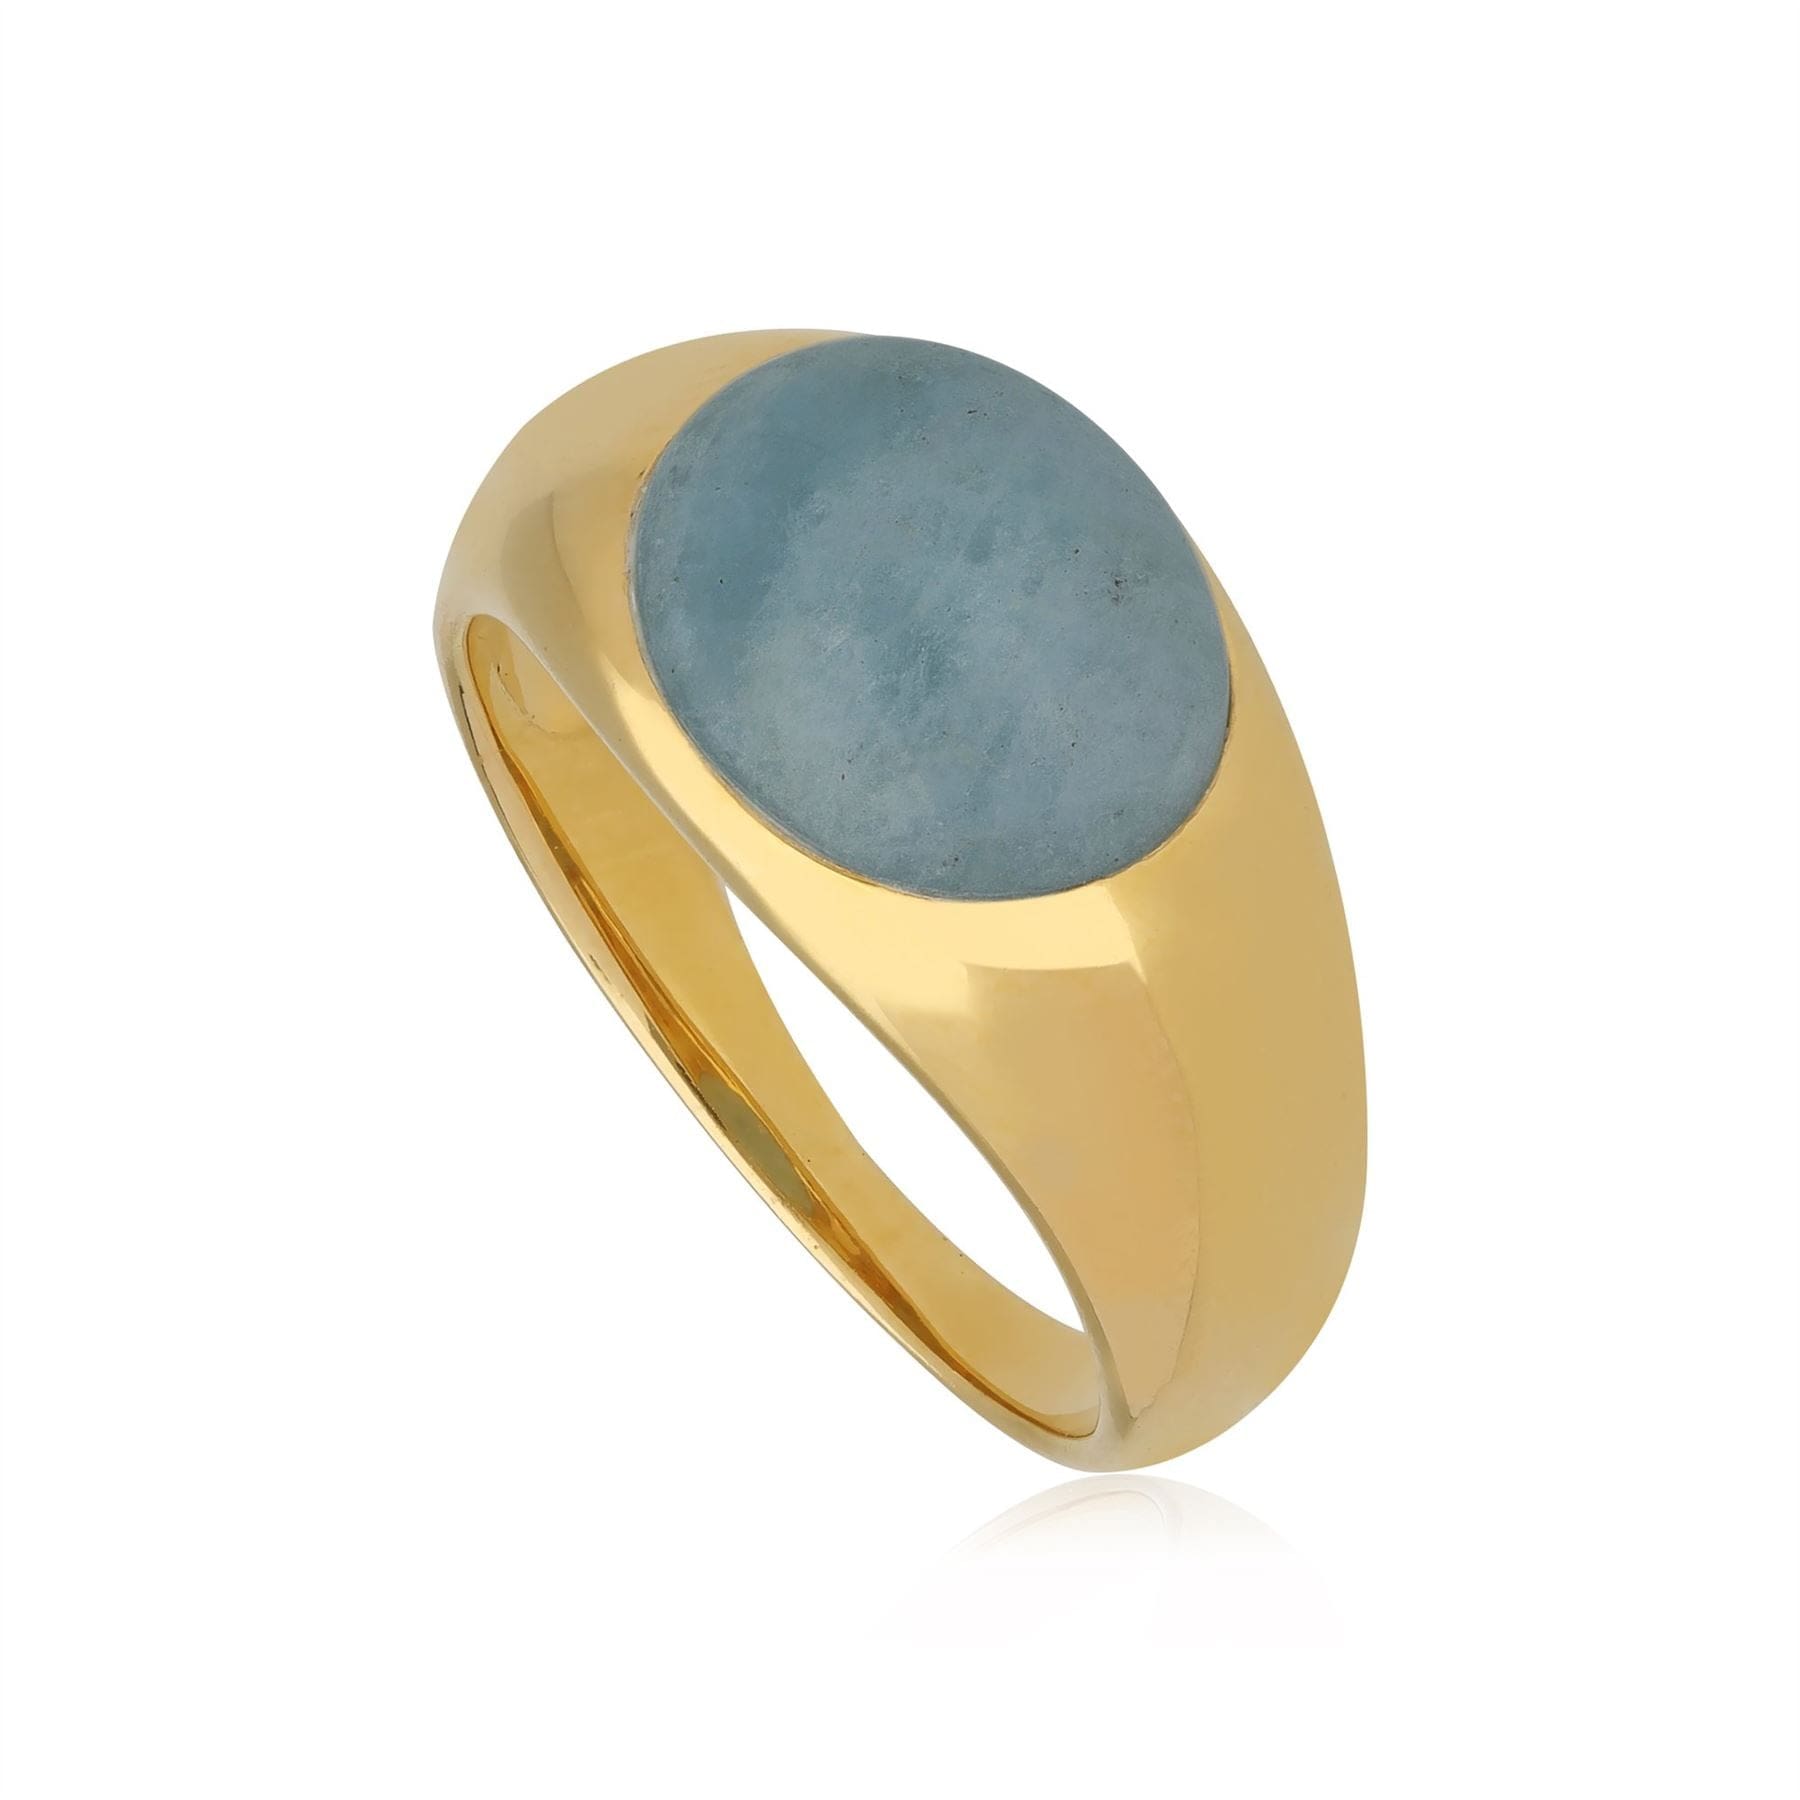 Kosmos Aquamarine Cocktail Ring in Gold Plated 925 Sterling Silver - Gemondo